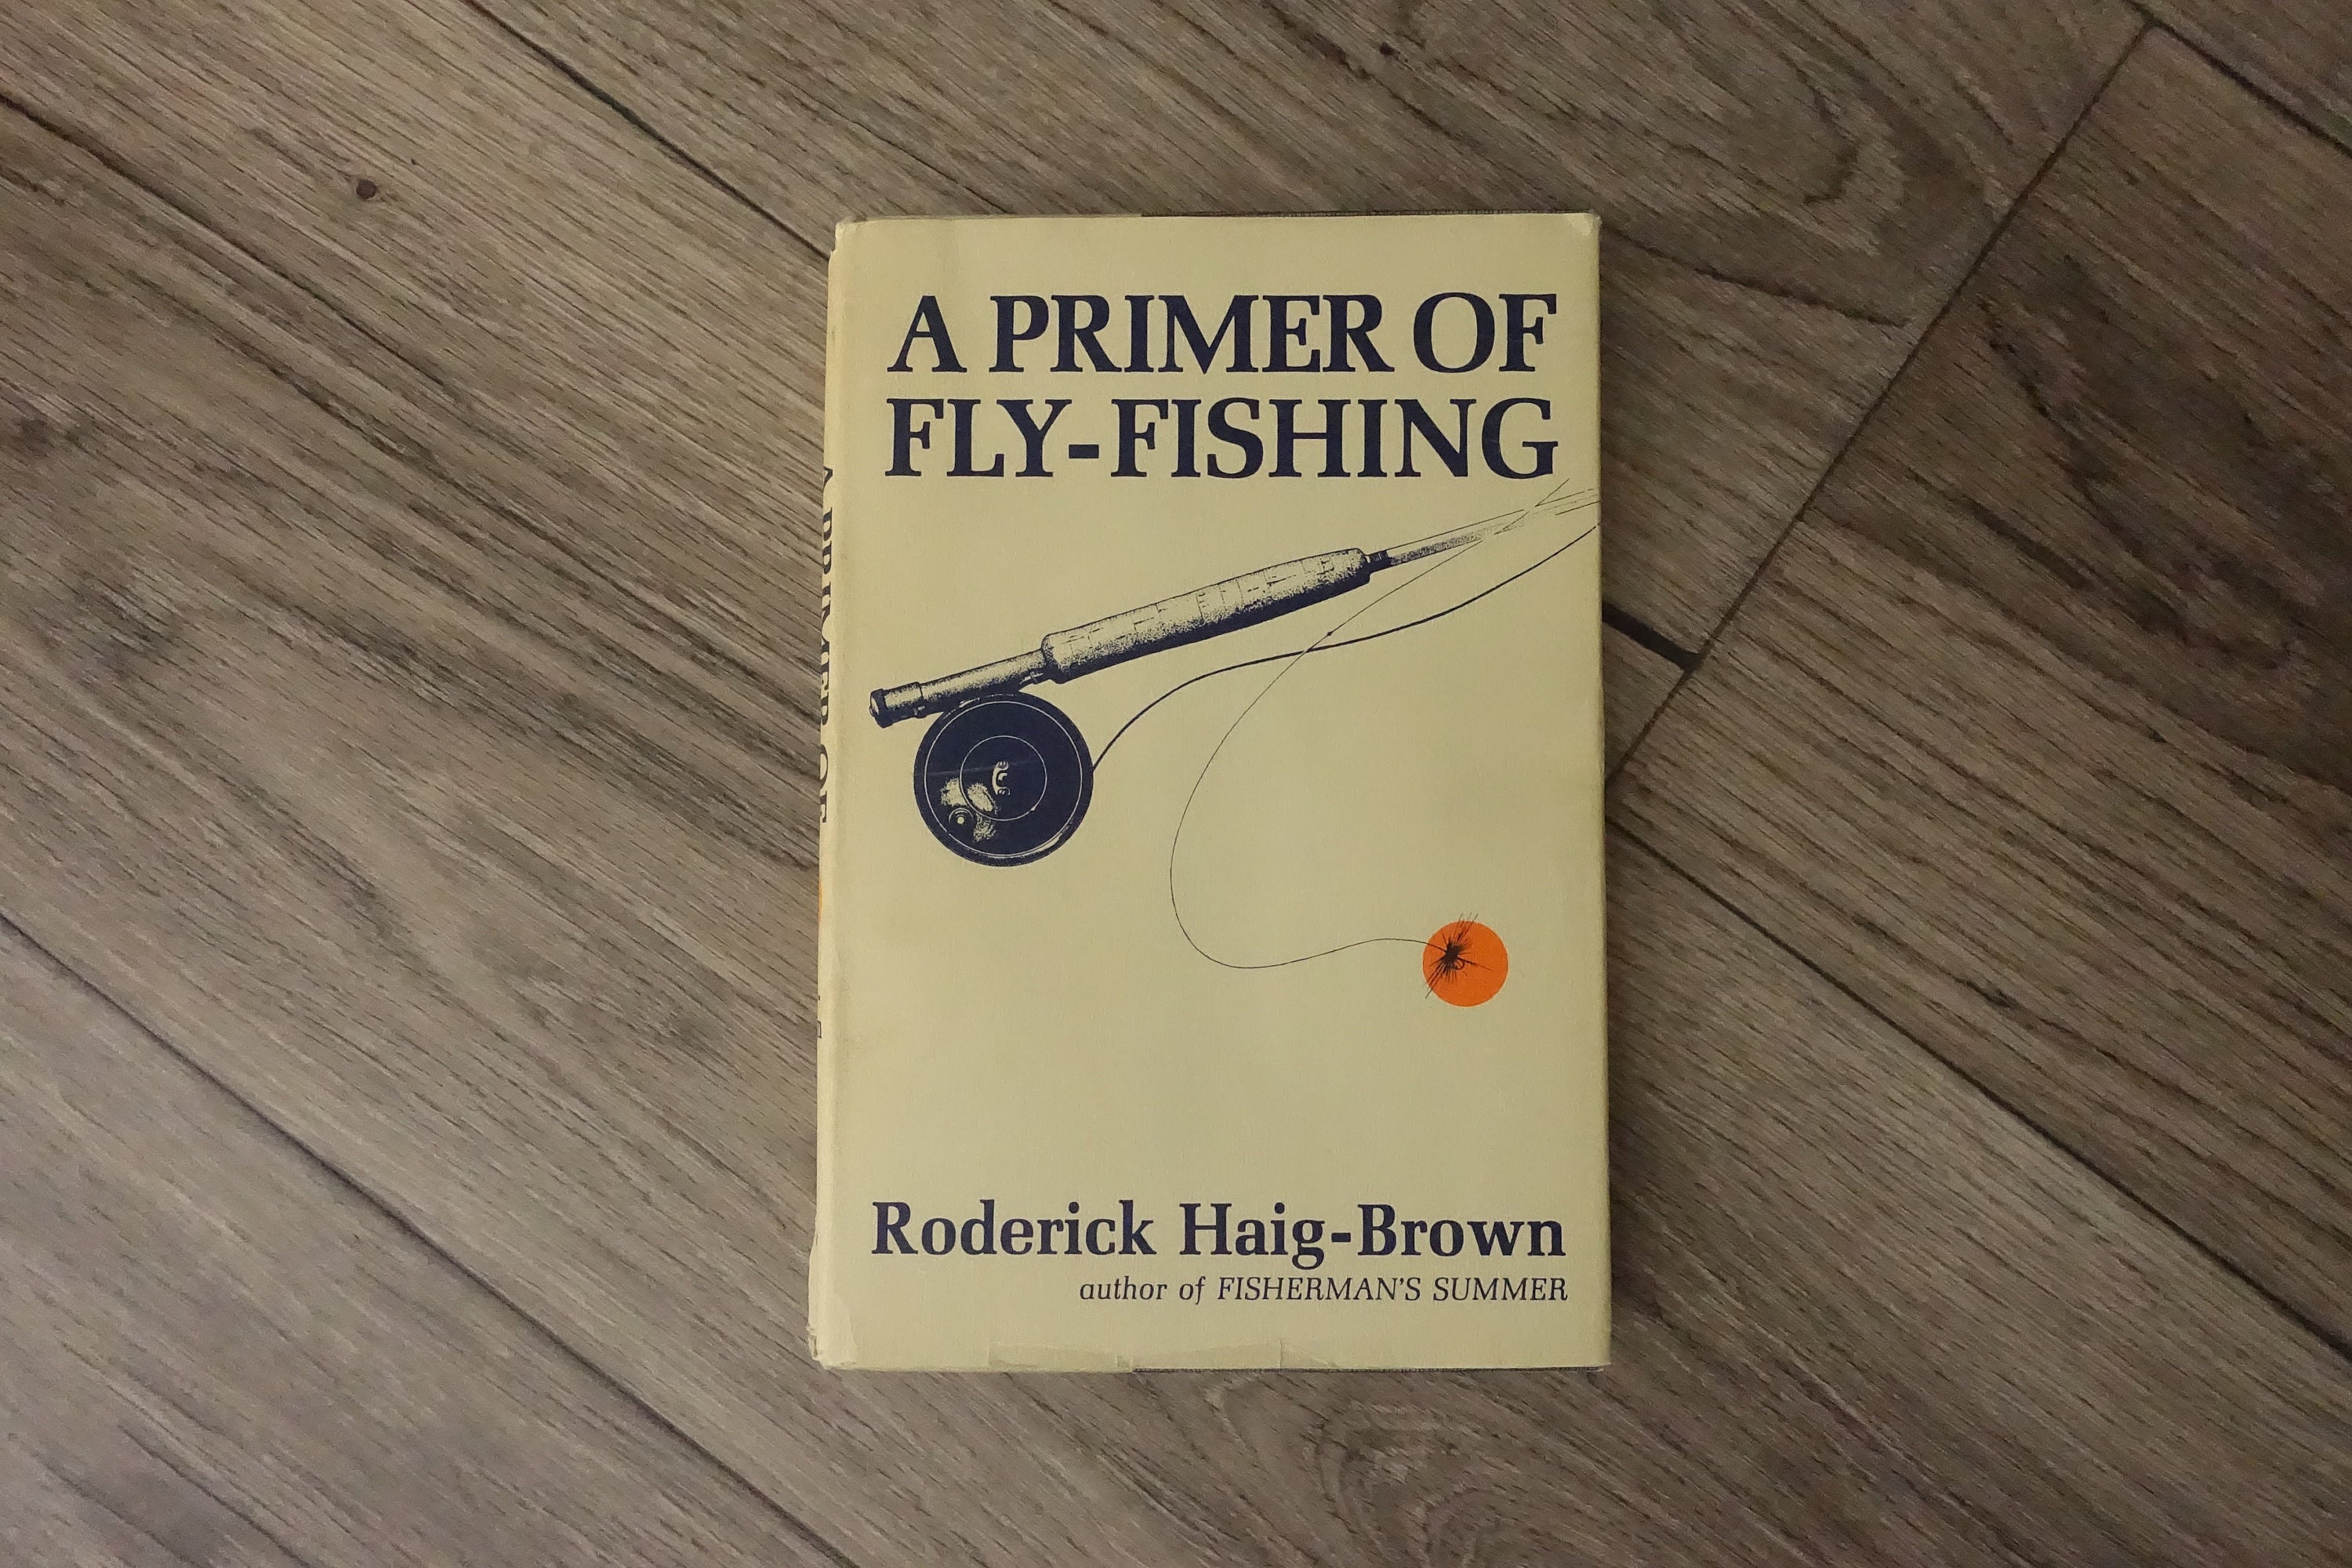 A Primer of Fly-fishing by Roderick Haig-brown Hardcover 1964 Fishing How  to Guide Book -  Canada